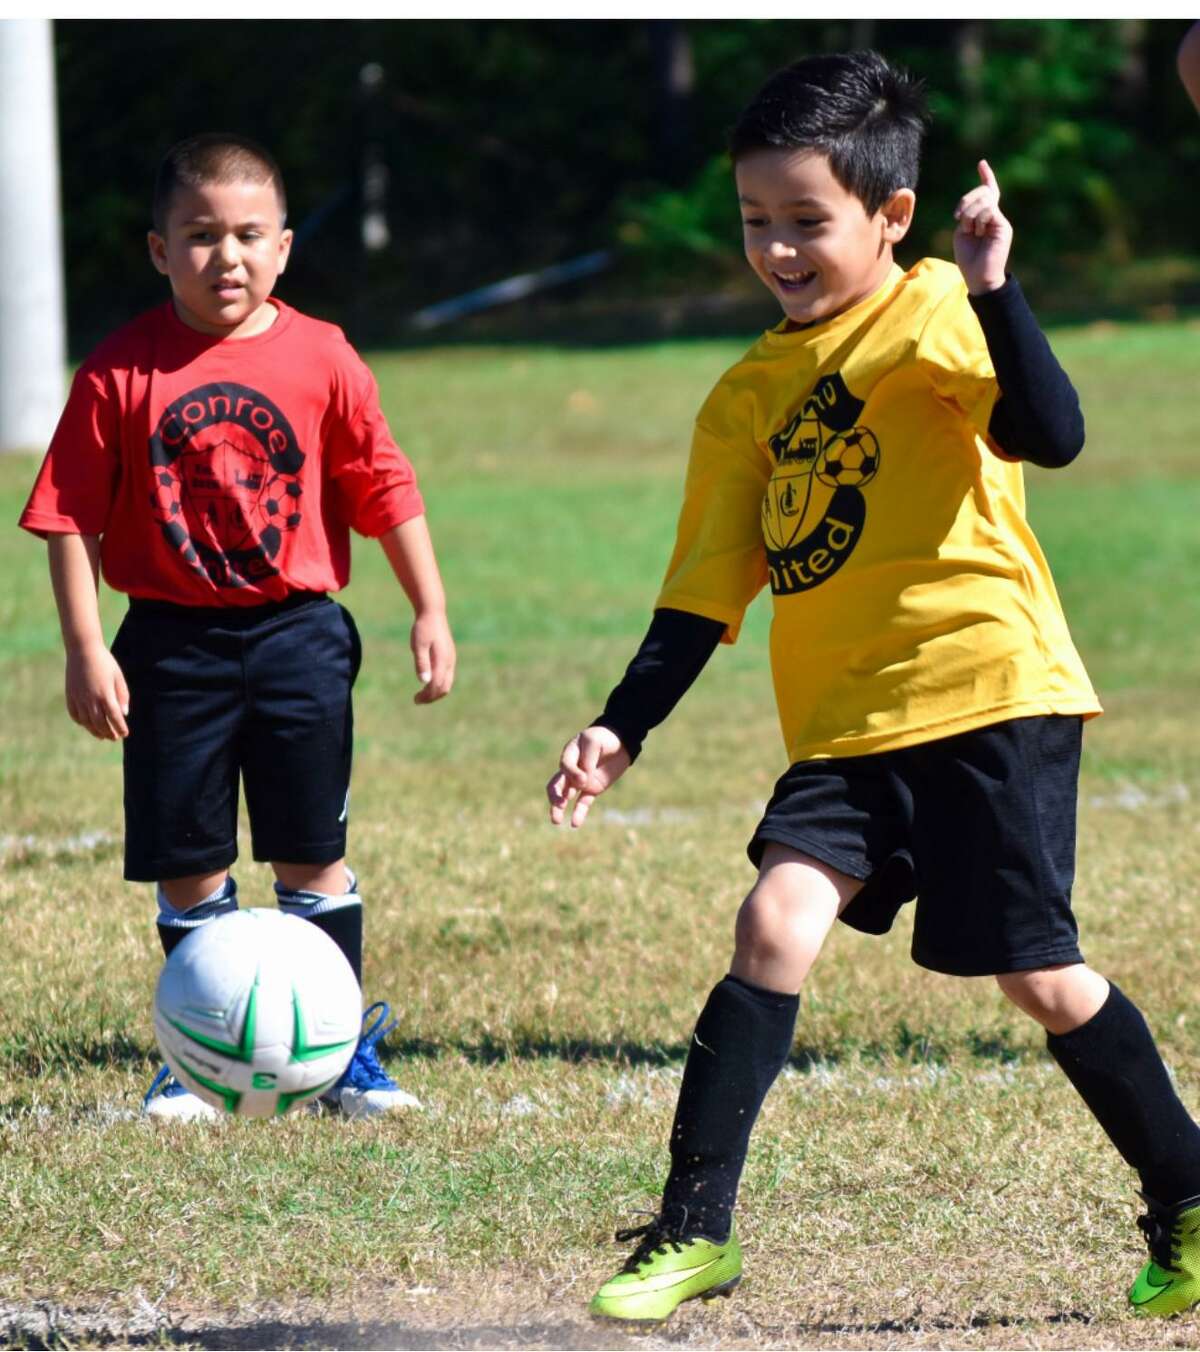 Register for Conroe United’s Fall Soccer Season for boys and girls ages 4-13 is now taking place through Aug. 6.